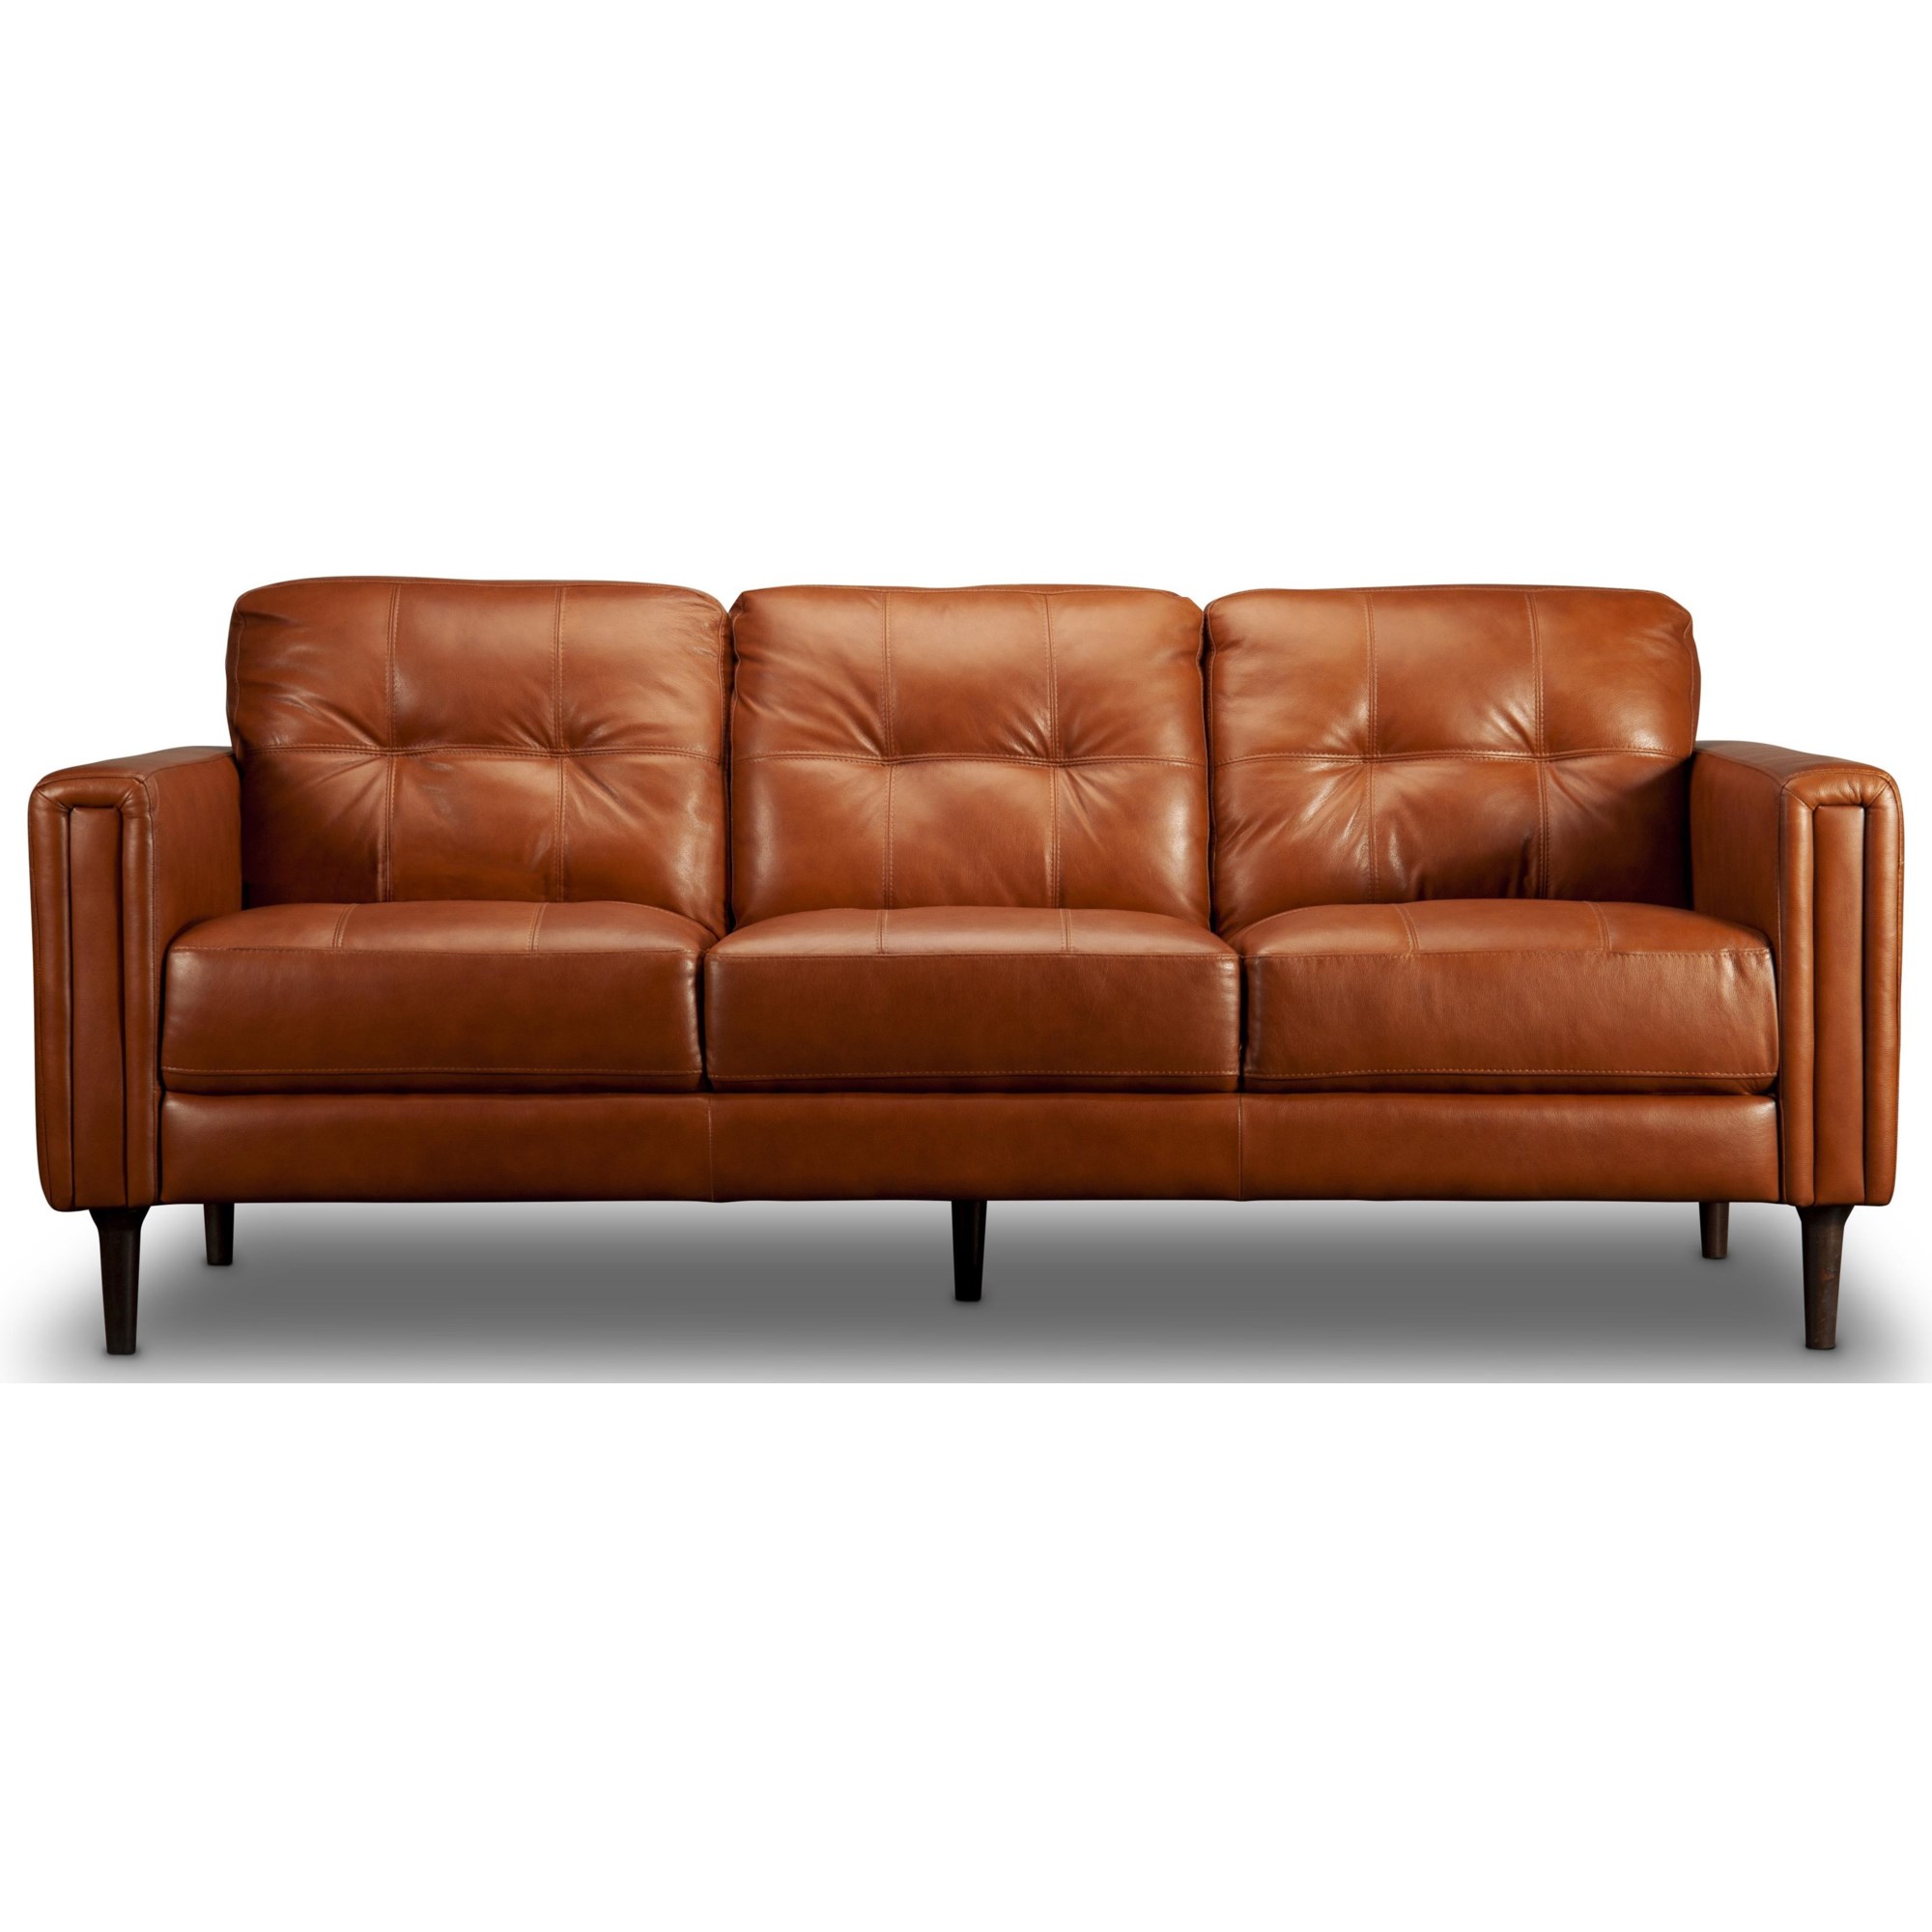 leather cushions seat bench - Google Search  Leather chair cushions, Leather  cushion, Leather chair